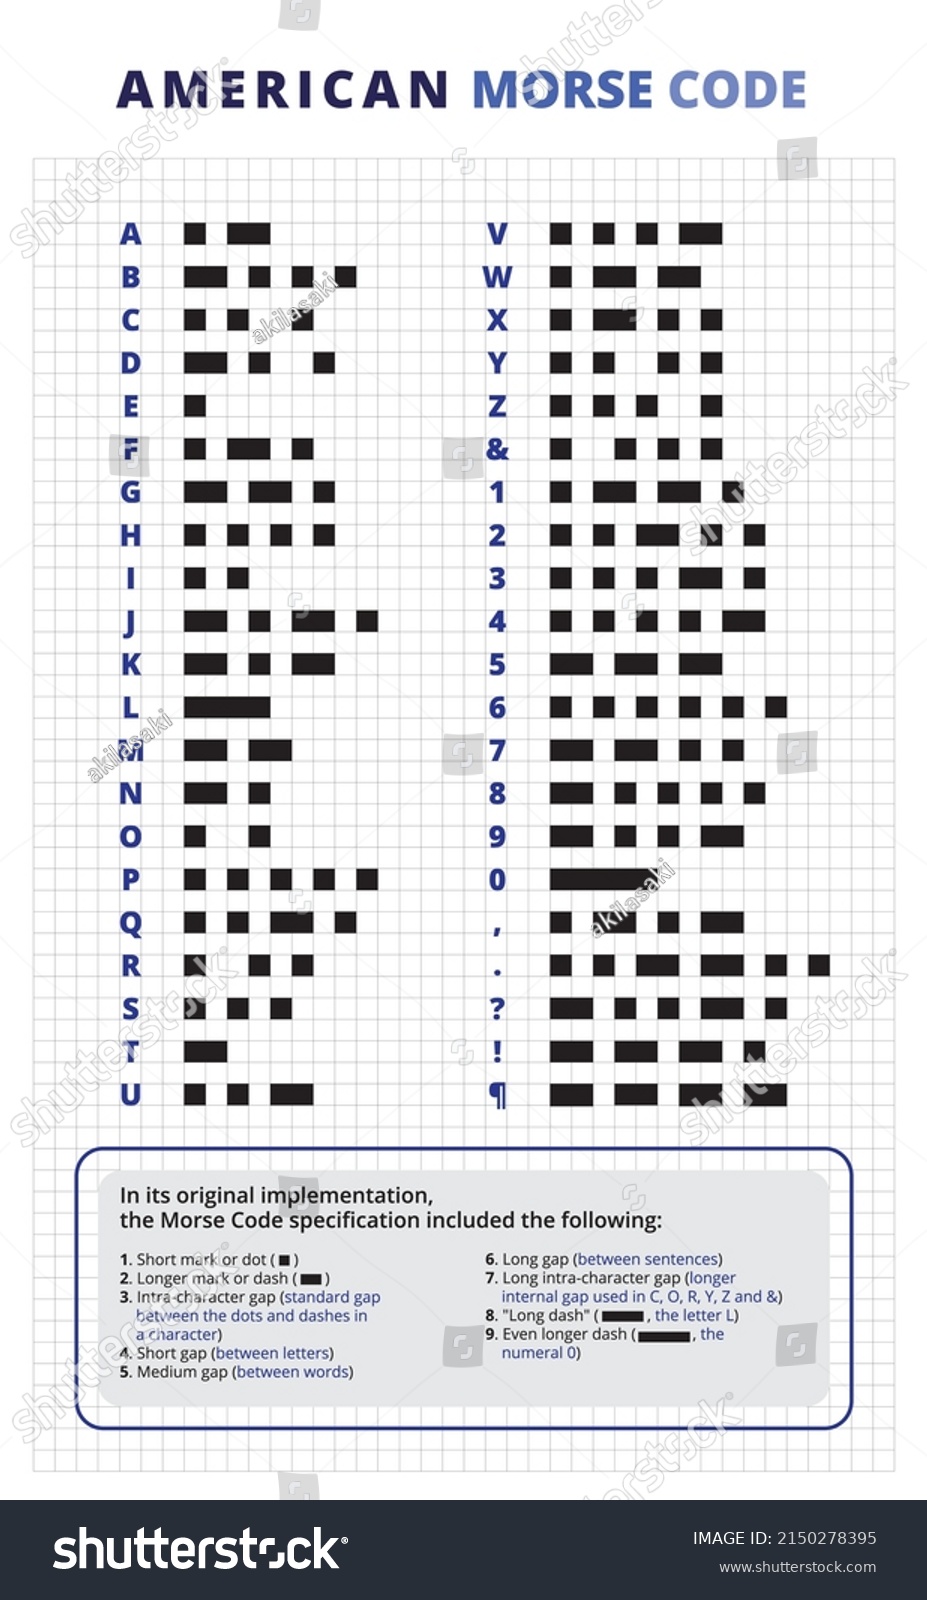 SVG of American Morse Code. Standard American Morse with guide line. Printable Morse code table. American Morse code in detail specification. svg